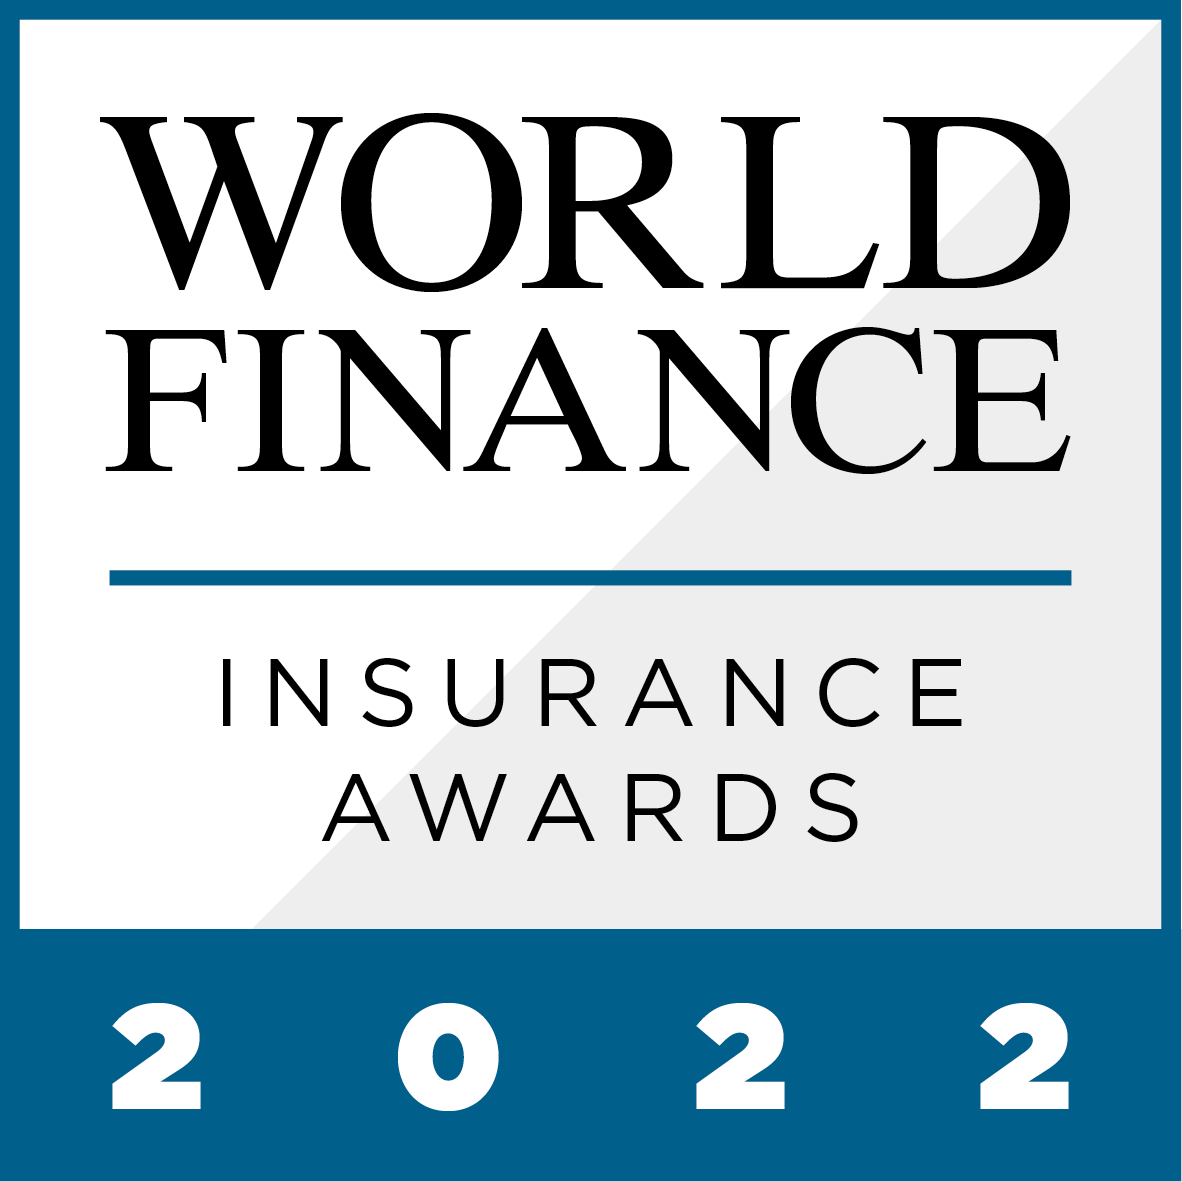 Please see below the full list of the Global Insurance Awards 2022, as awarded by World Finance magazine